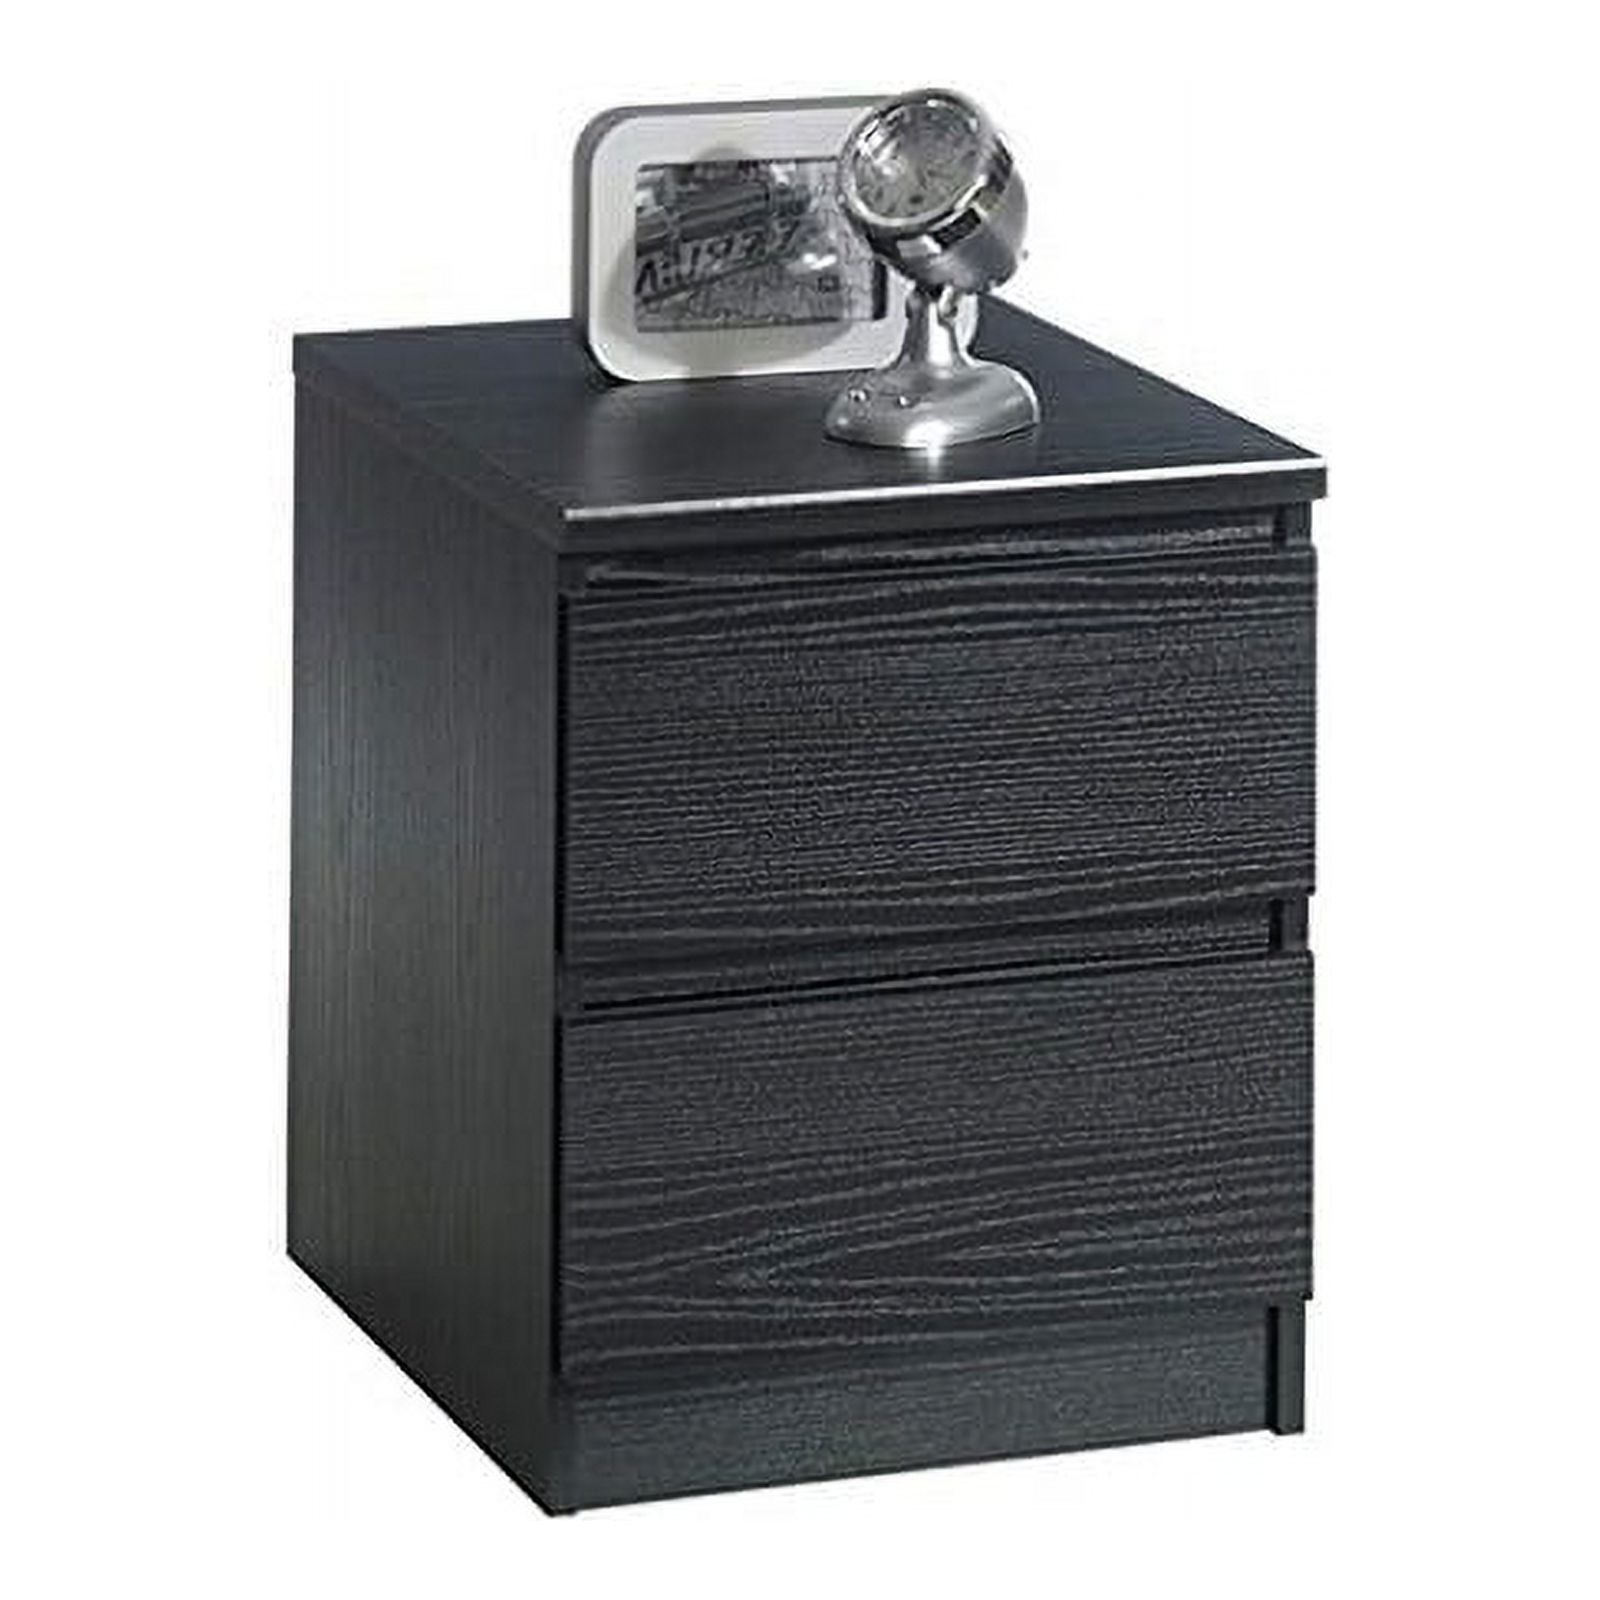 Home Square 2 Drawer Night Stands in Black Woodgrain (Set of 2) - image 3 of 4